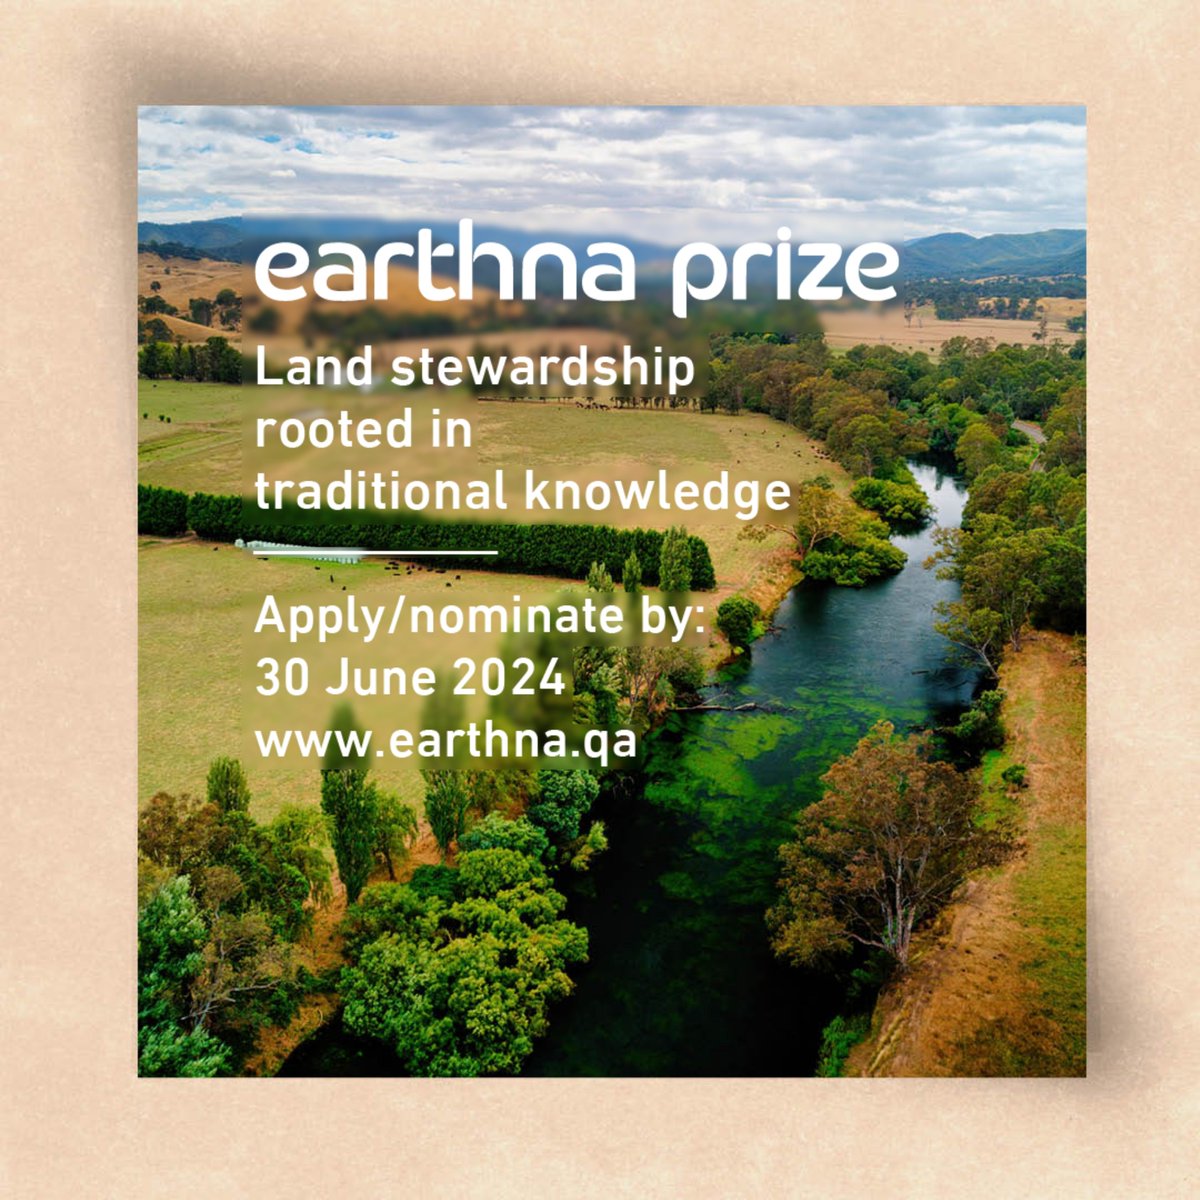 The @earthnaqa Earthna Prize awards $1M to projects that blend traditional knowledge with modern advances in sustainable land management 🌾 Nominations and applications are invited by June 30, 2024. Learn more at earthna.qa 🇶🇦 #UNited4Land